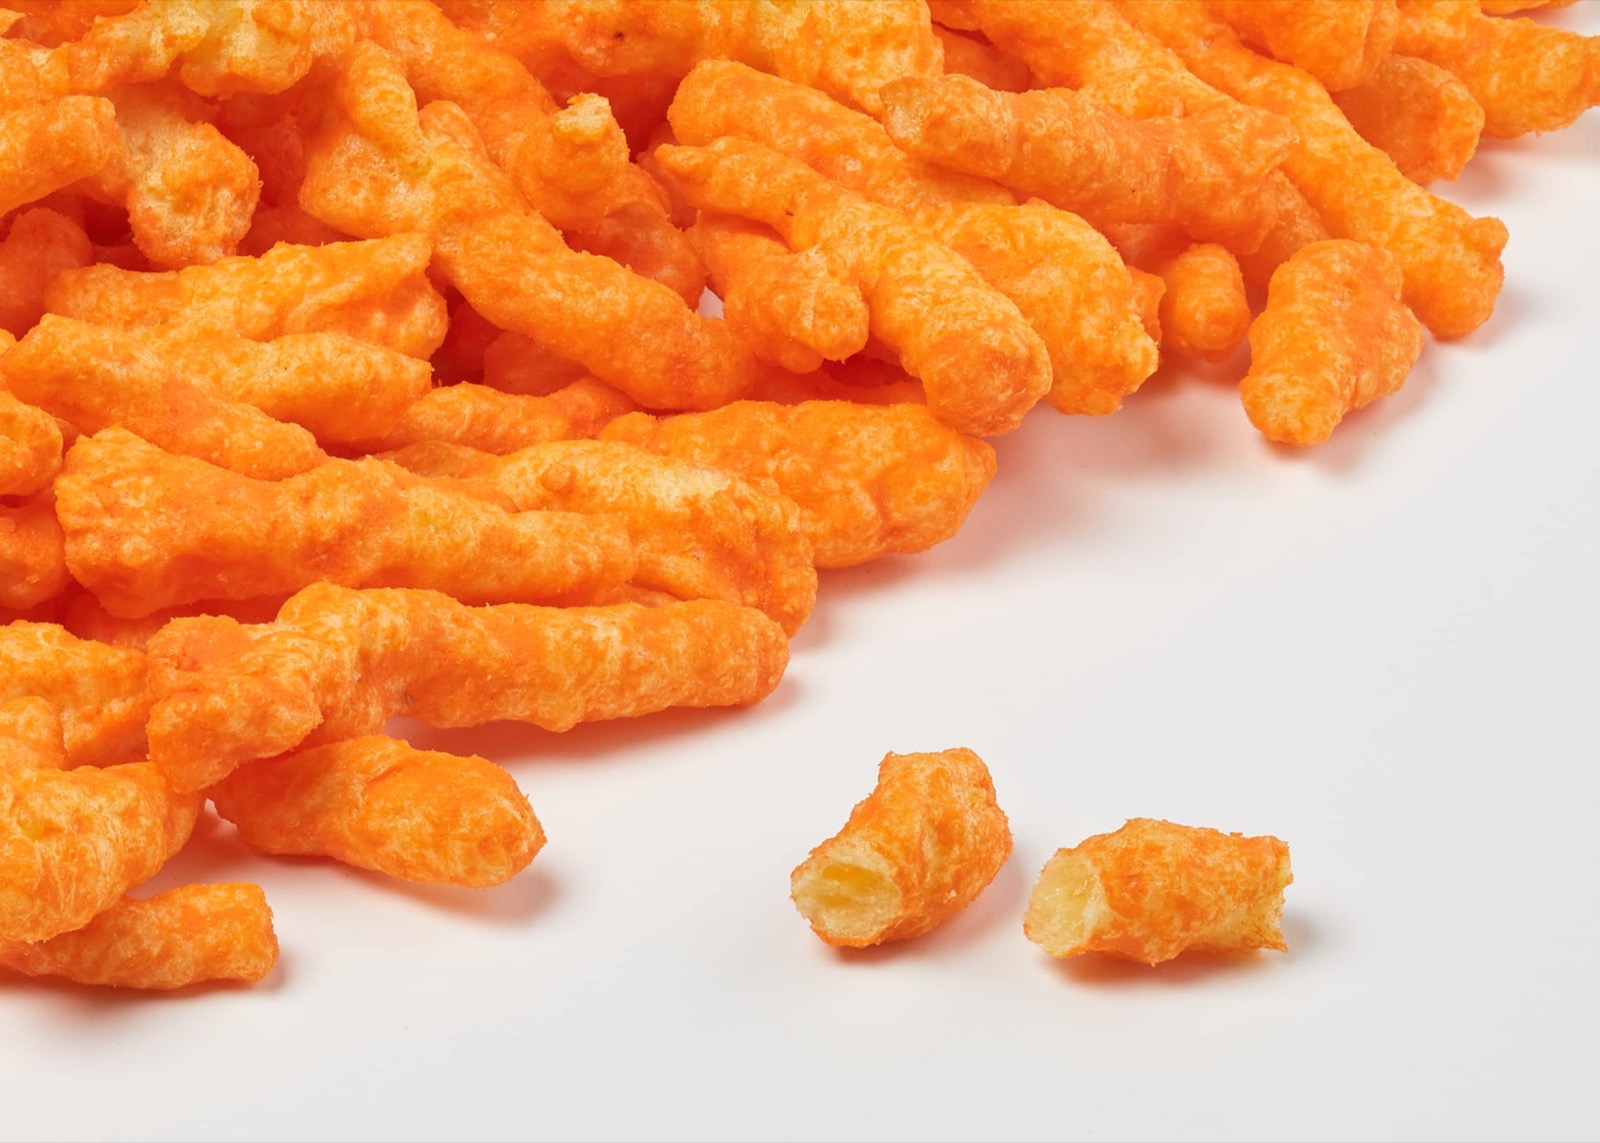 If You Like 22 of 30 Things Then You Definitely Have We… Quiz Crunchy Cheetos